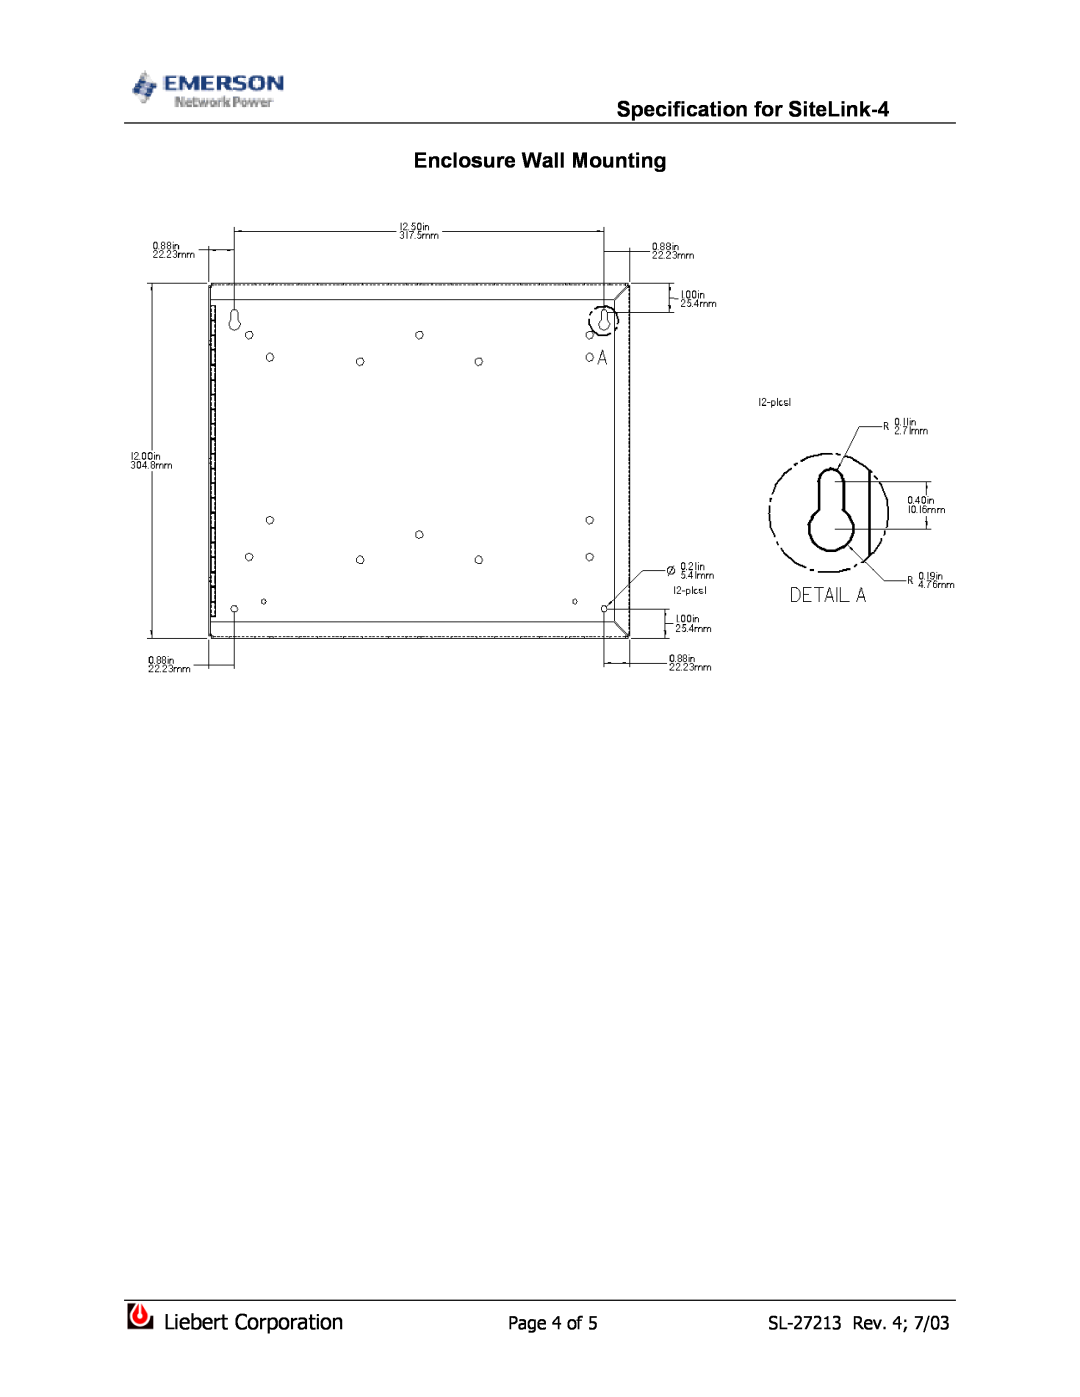 Emerson Enclosure Wall Mounting, Page 4 of, Specification for SiteLink-4, Liebert Corporation, SL-27213Rev. 4 7/03 